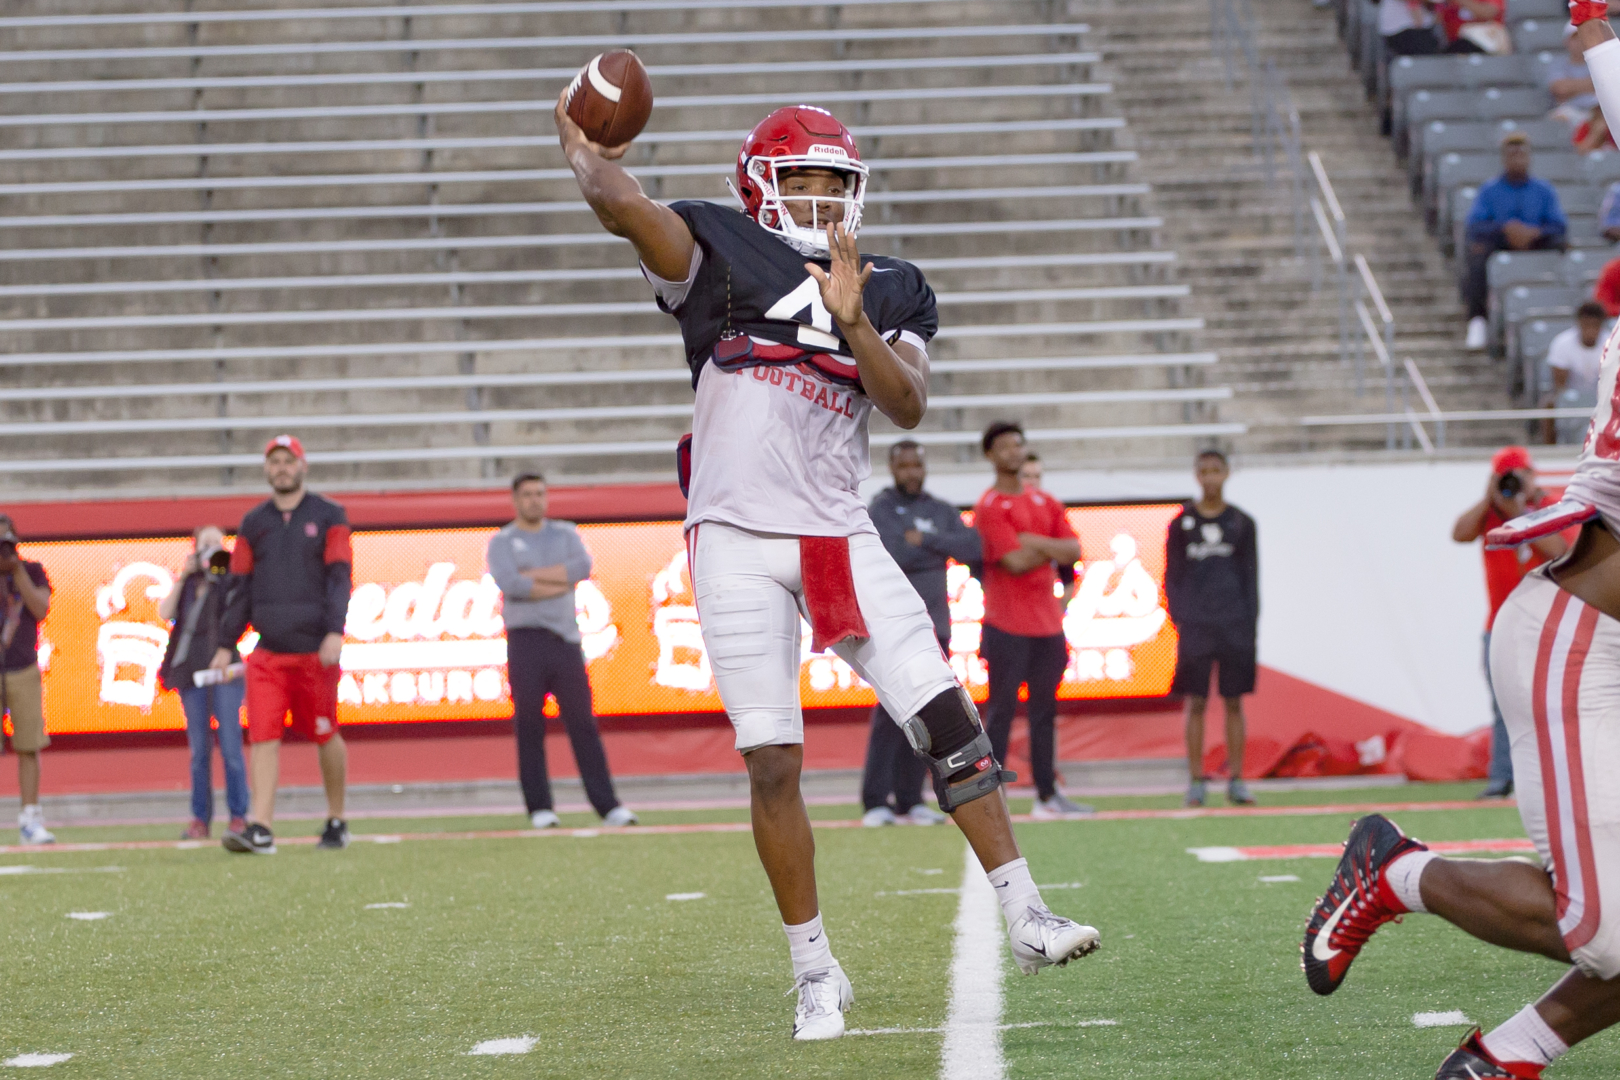 Coming back from a knee injury in 2018, senior quarterback D’Eriq King is set to have a good season with the Cougars. | Trevor Nolley/The Cougar